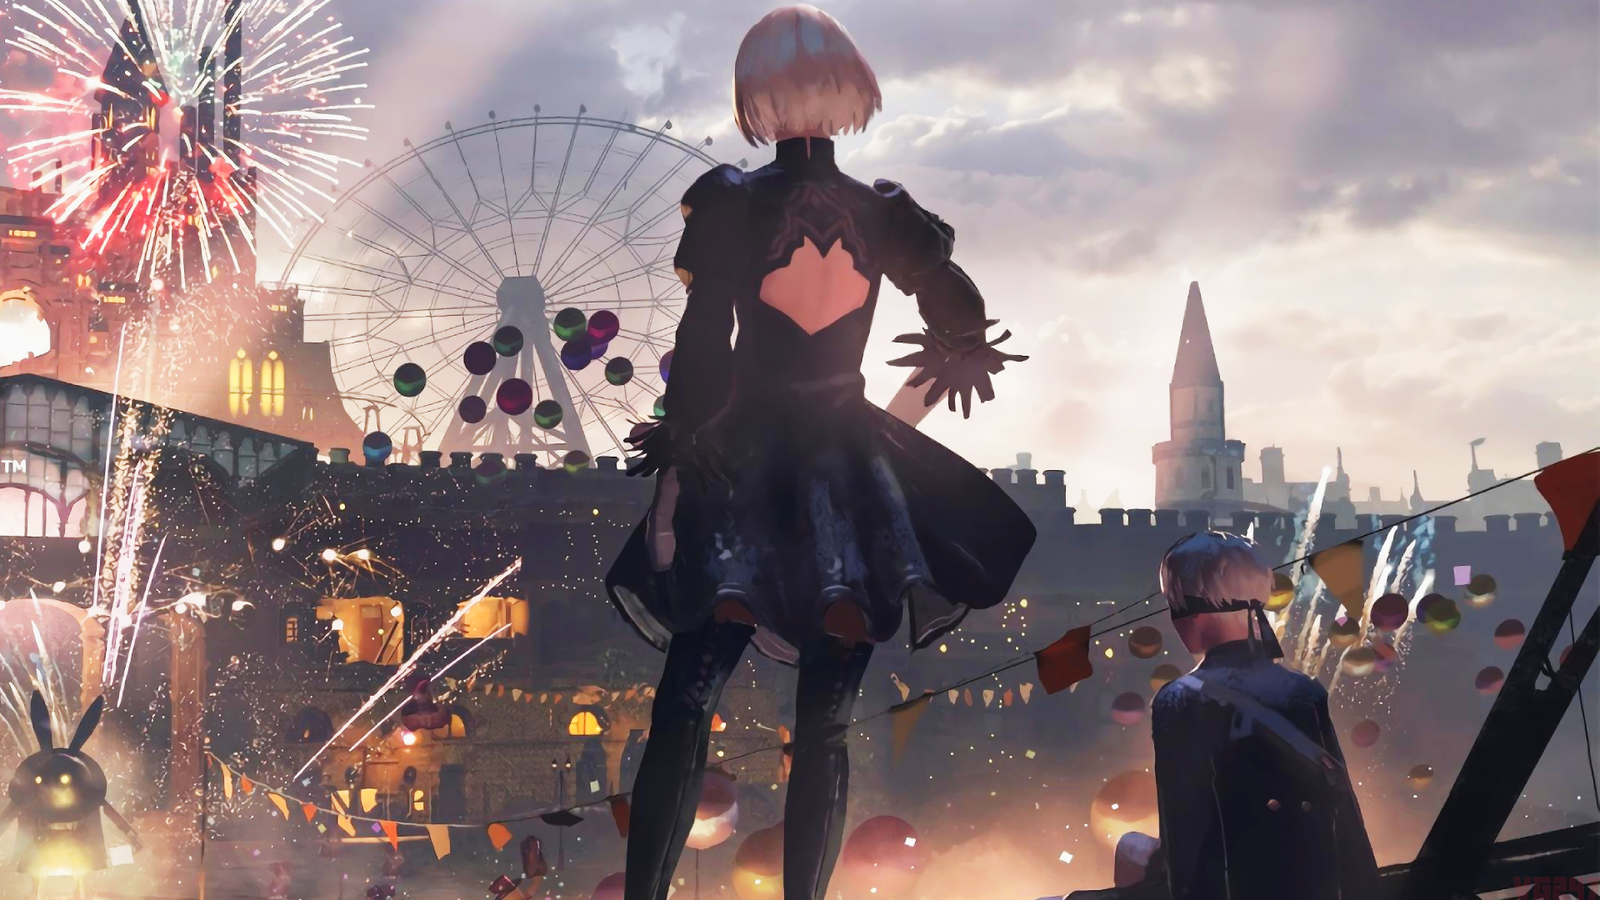 https://assetsio.reedpopcdn.com/Nier-Automata-Switch_zZvR2Lw.jpg?width=1600&height=900&fit=crop&quality=100&format=png&enable=upscale&auto=webp